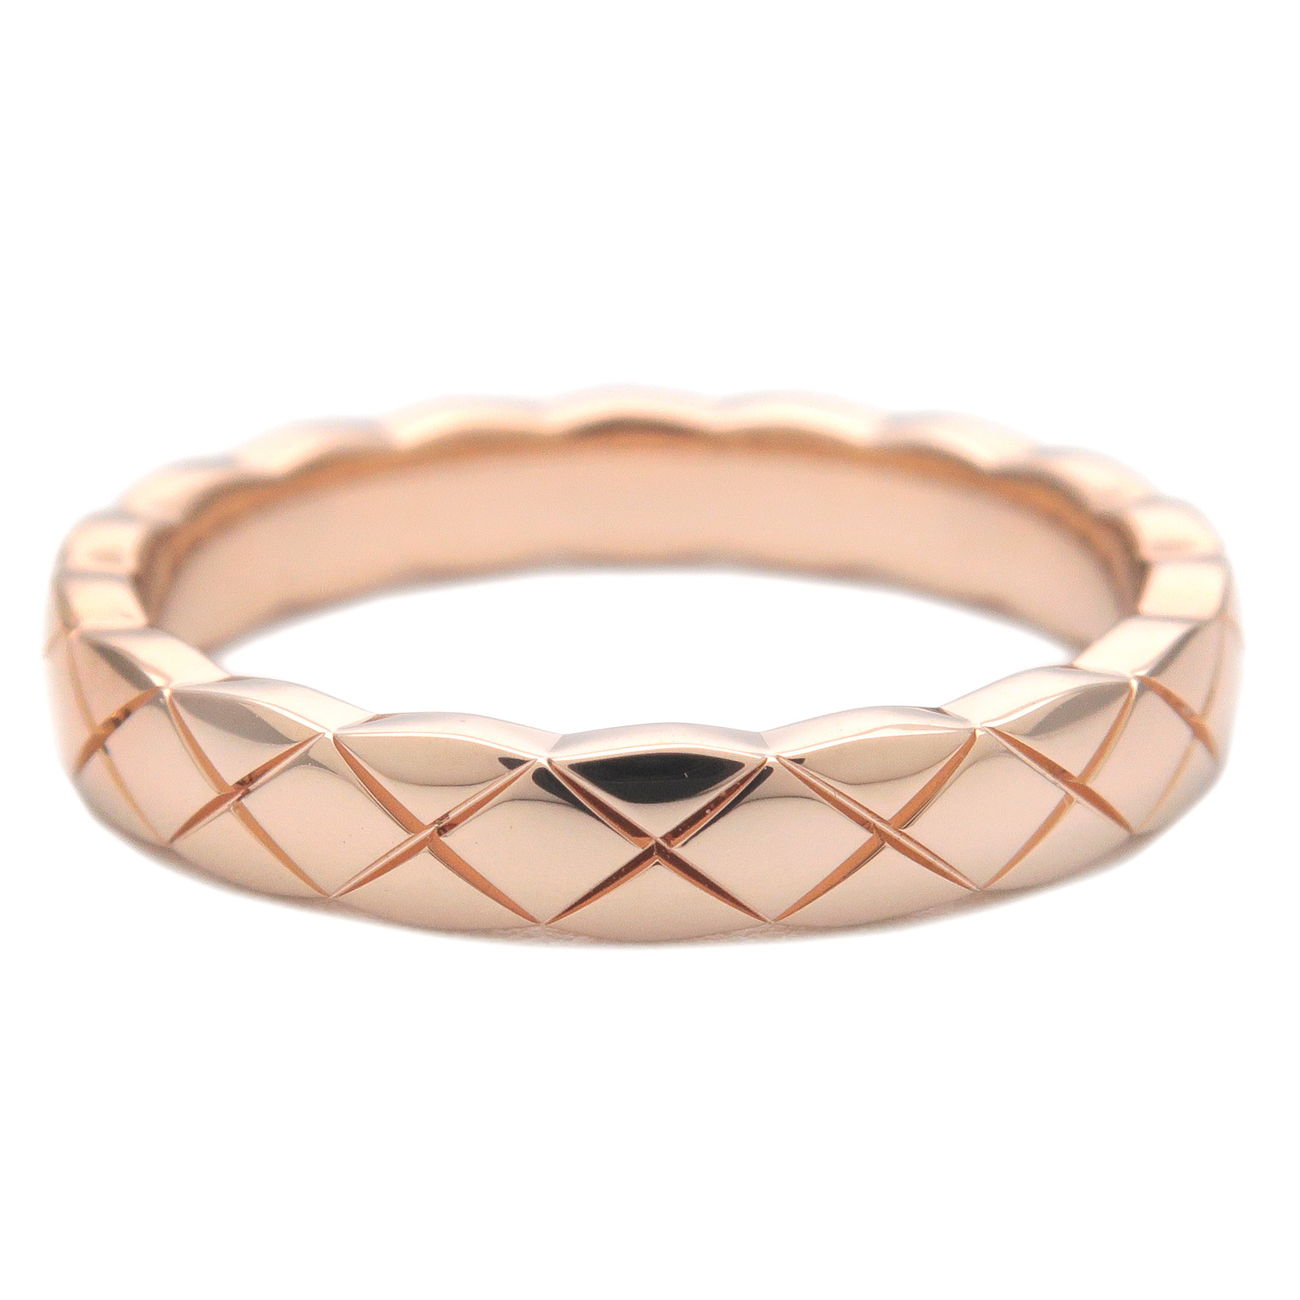 Chanel-Coco-Crush-Ring-Mini-K18PG-750PG-Rose-Gold-#51-US5.5 –  dct-ep_vintage luxury Store